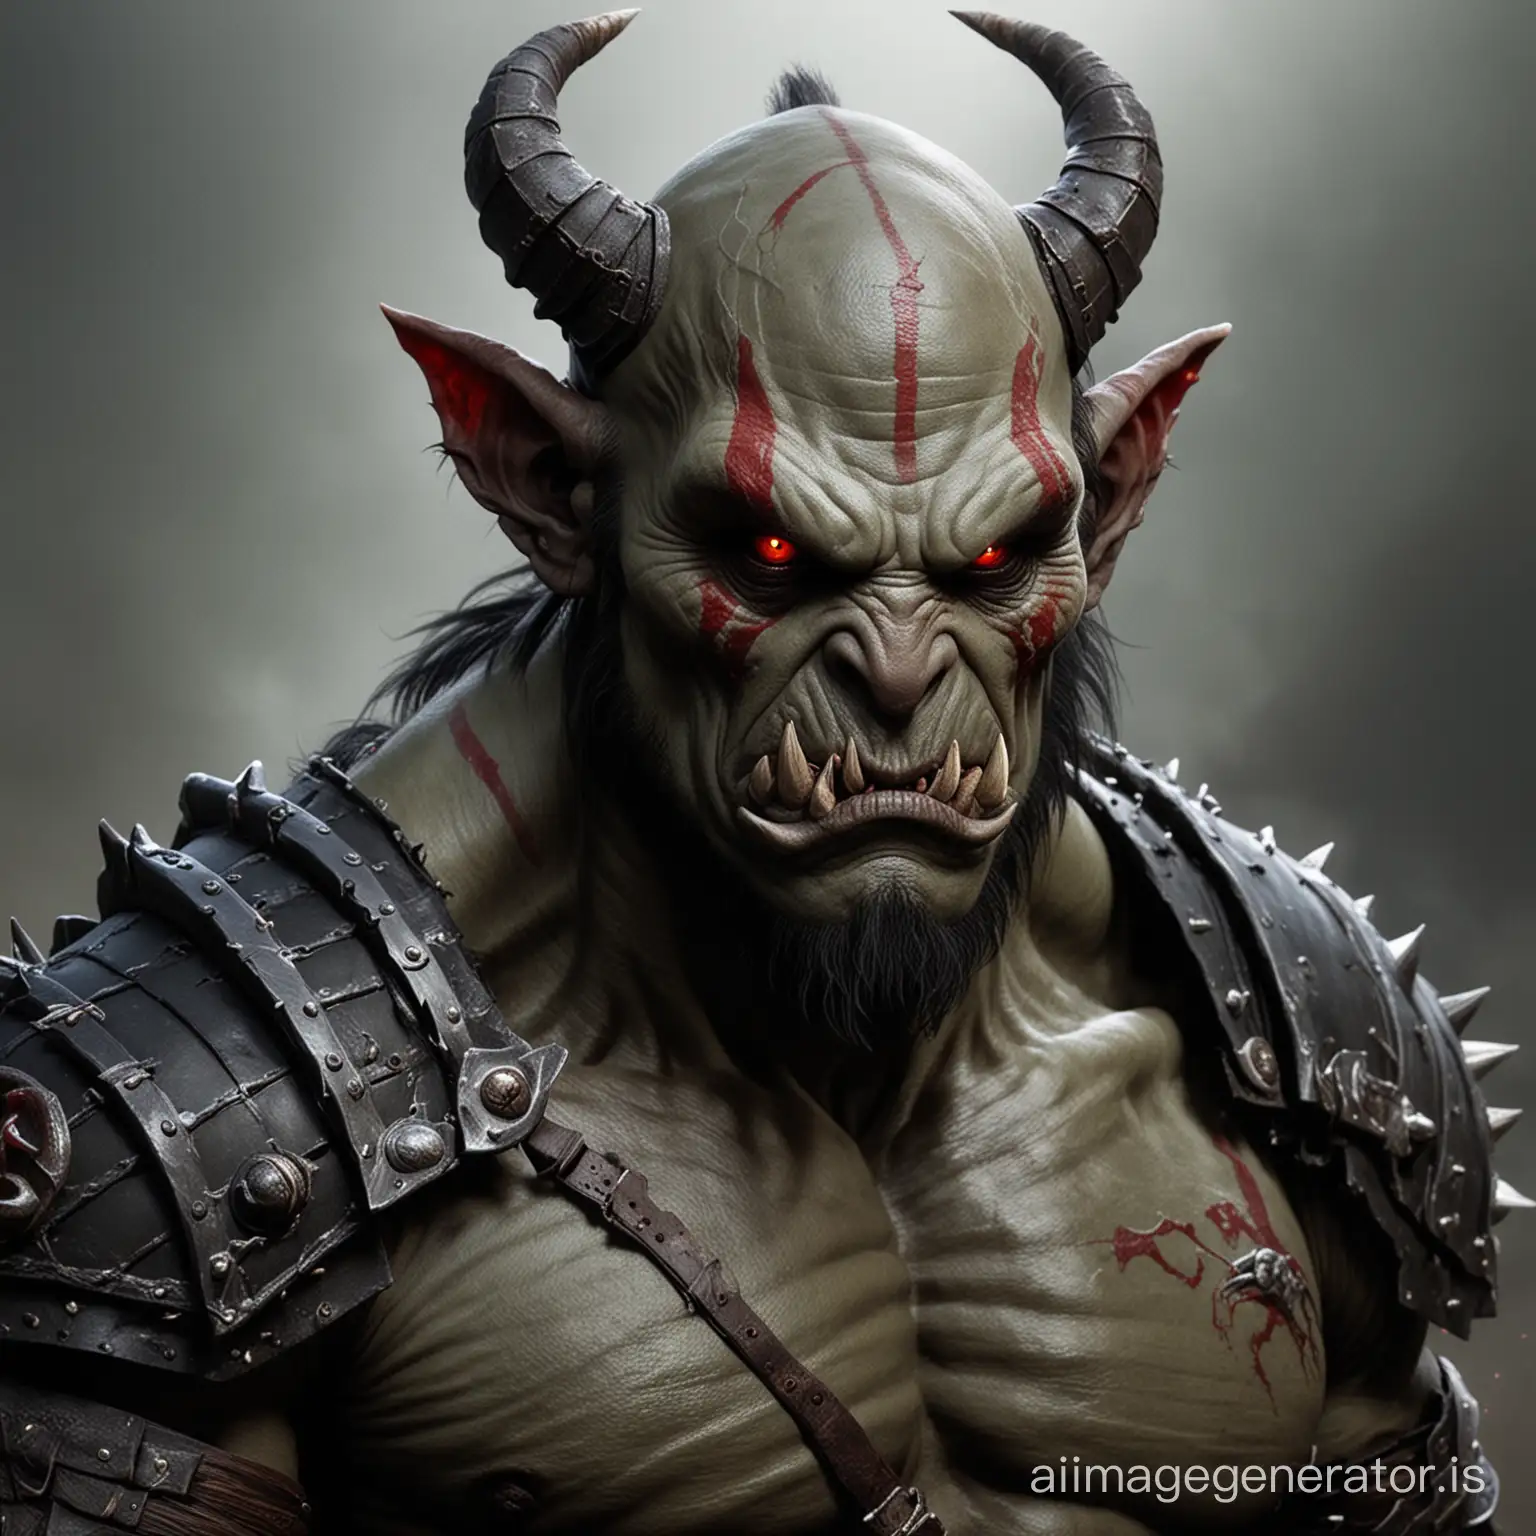 Baldless orc like creature with red eyes and horns. He has big muscles and wears a black samurai like armor